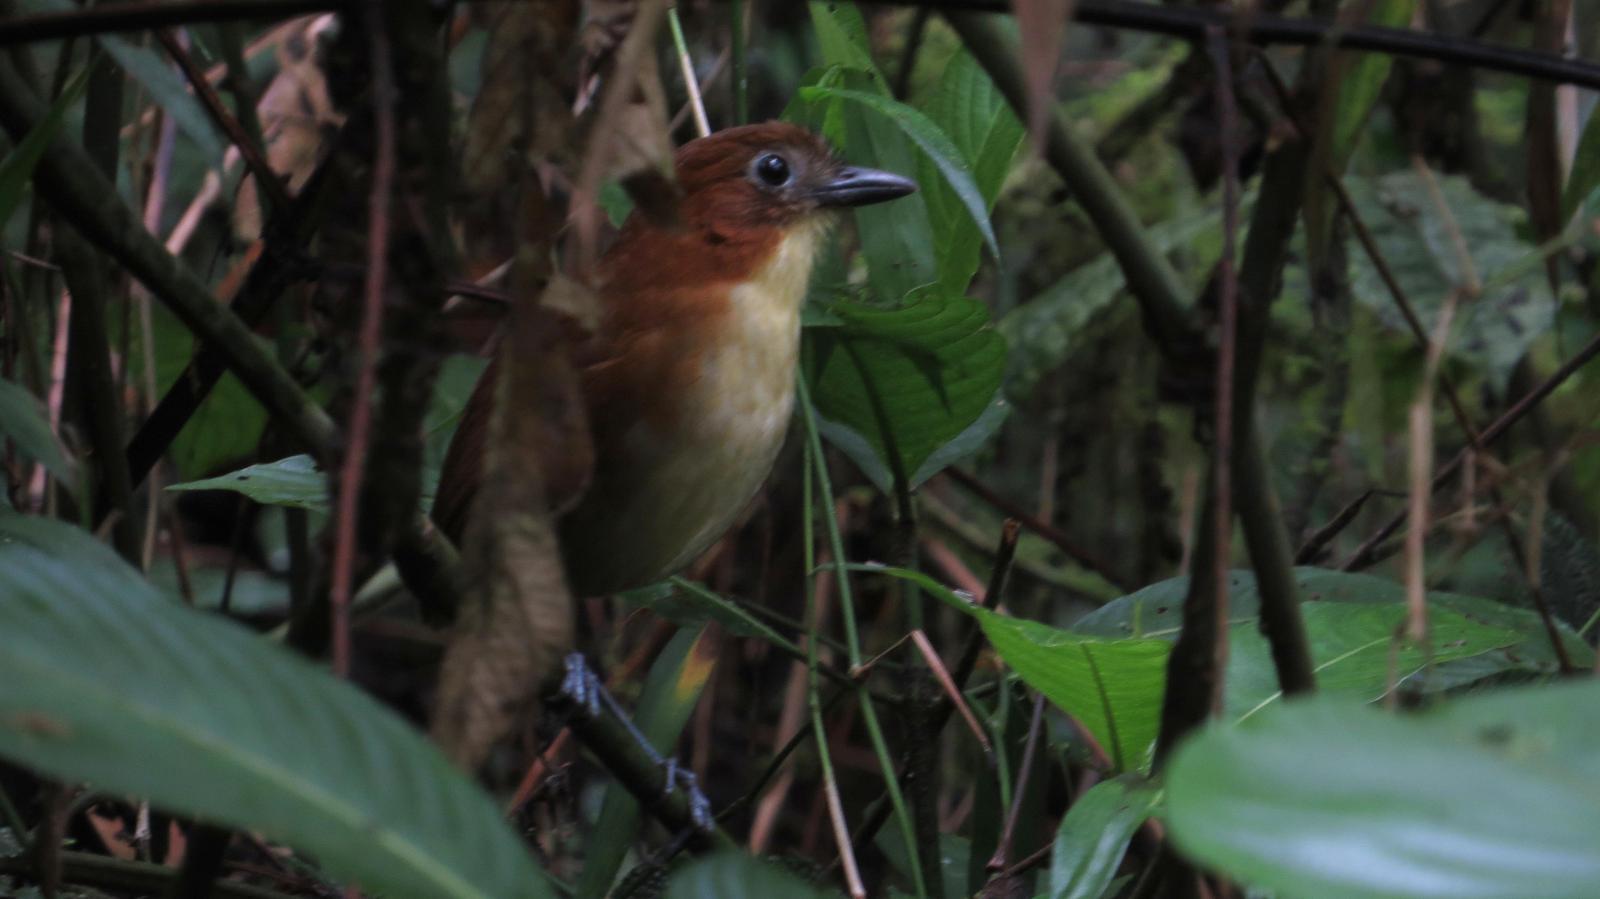 Yellow-breasted Antpitta Photo by Jeff Harding